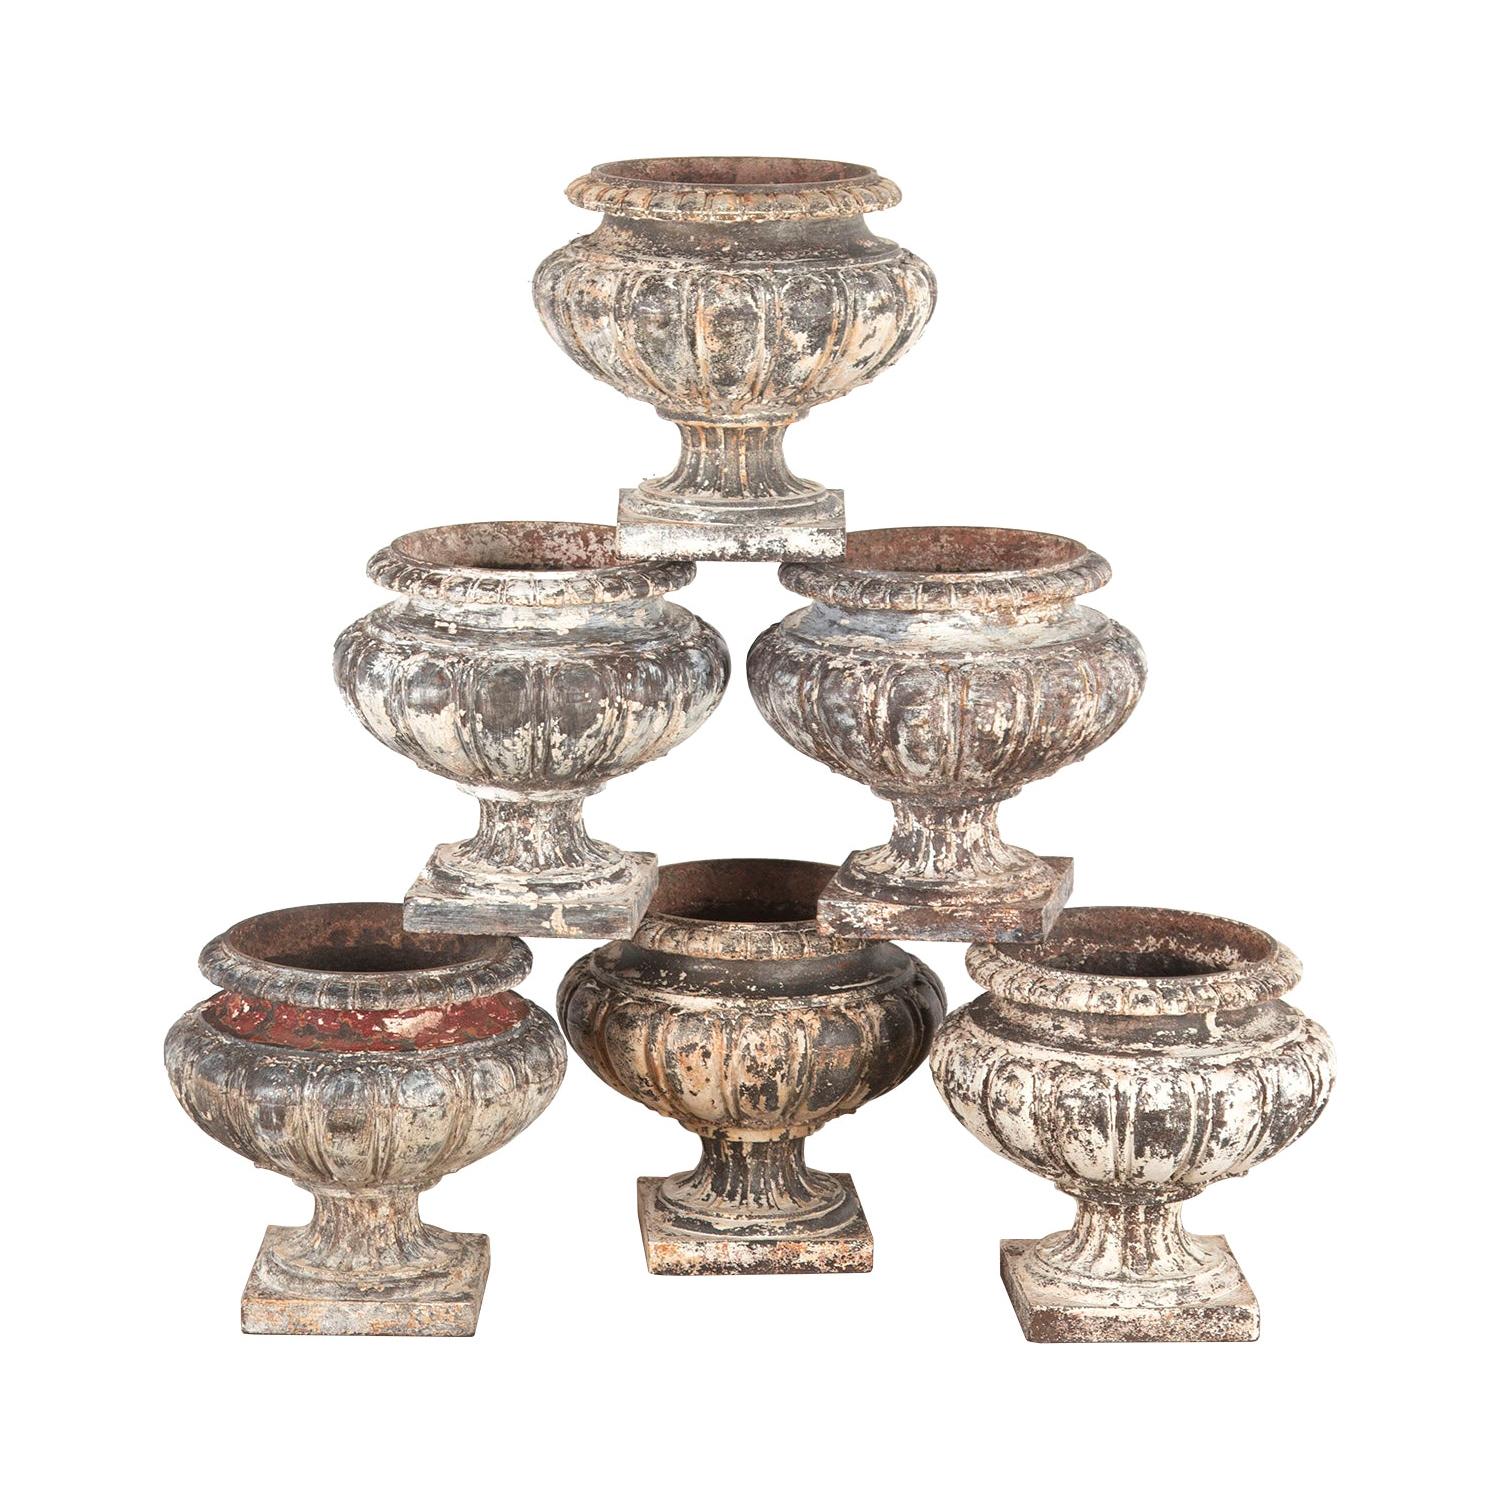 Collection of Six 19th Century Pumpkin Urns